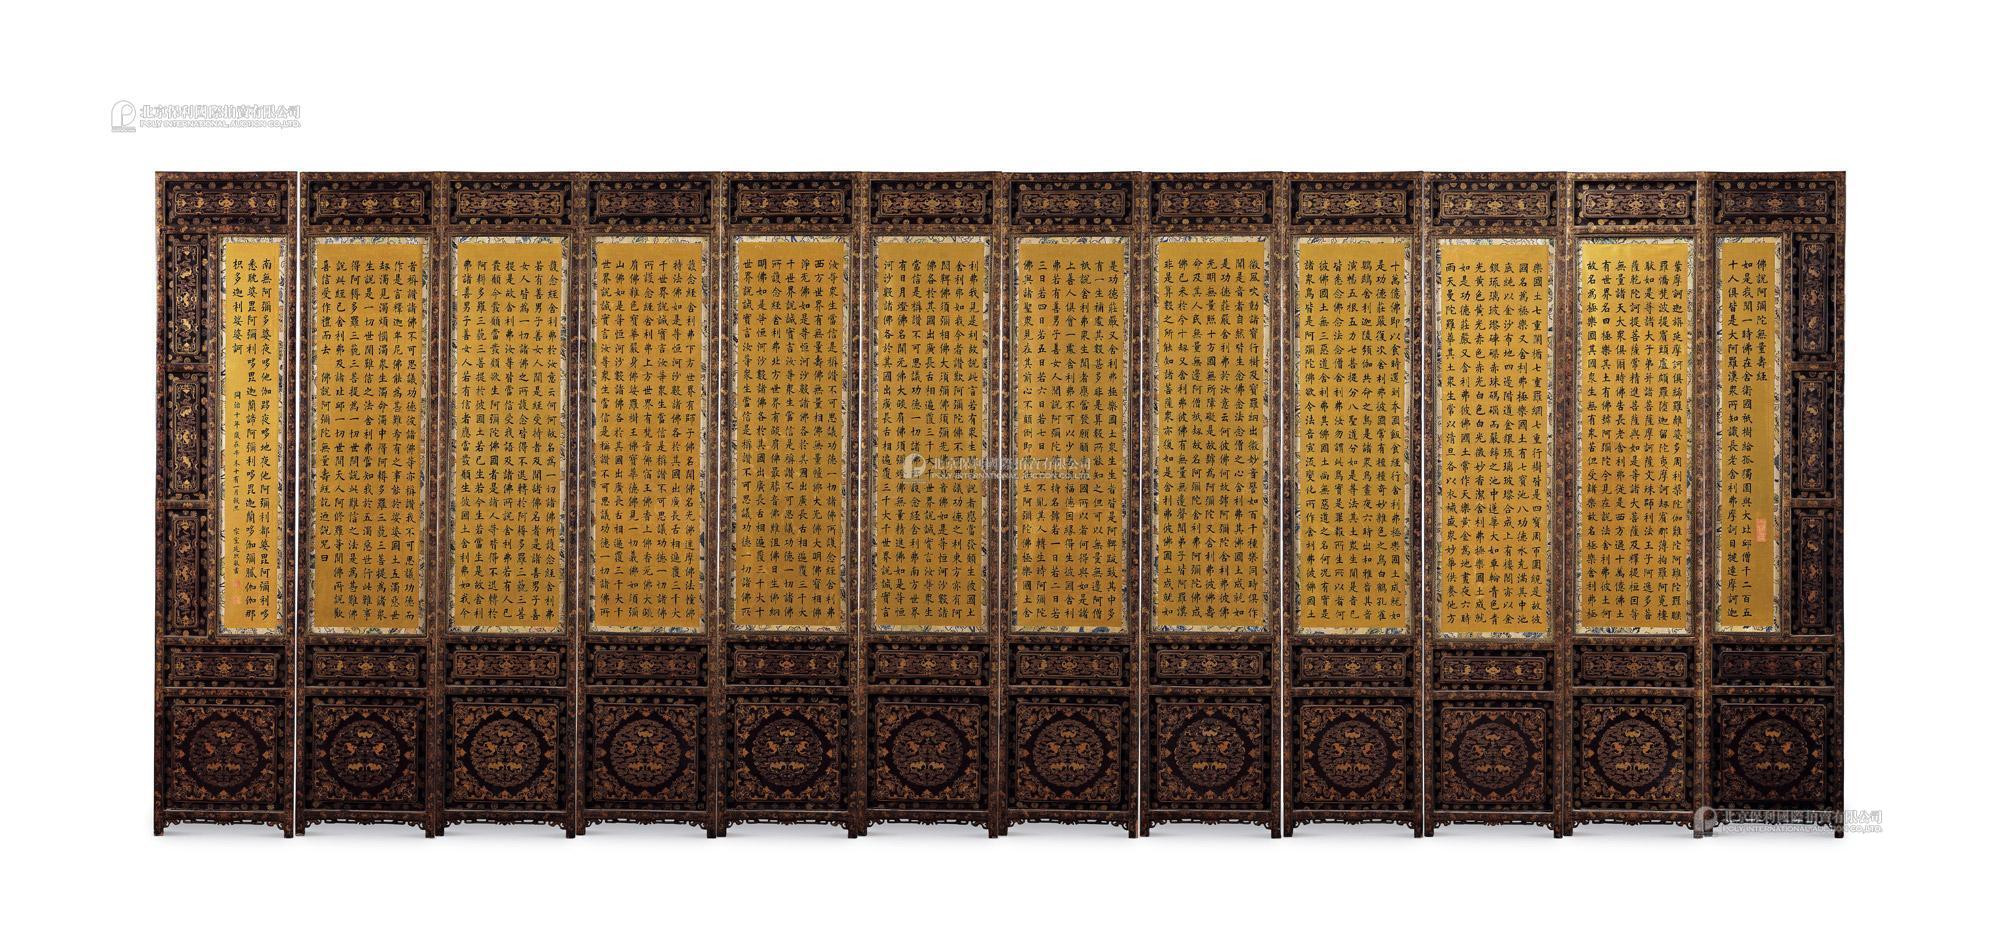 A BLACK LACQUER GILT-DECORATED TWELVE-FOLD SCREEN